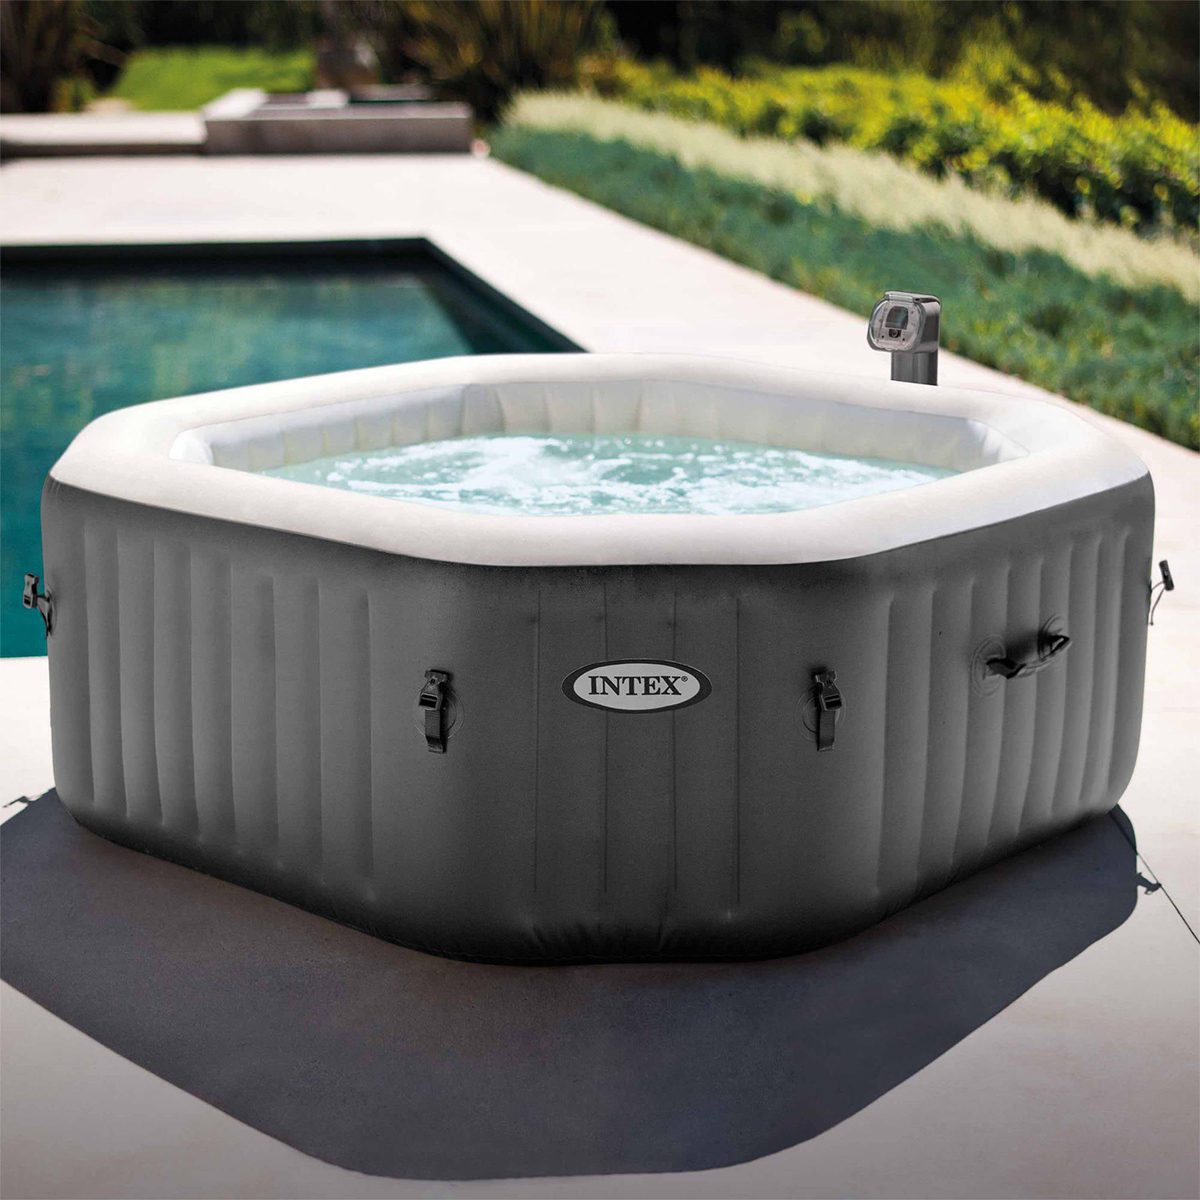 An Affordable Intex Inflatable Hot Tub Is Just What Your Backyard Needs